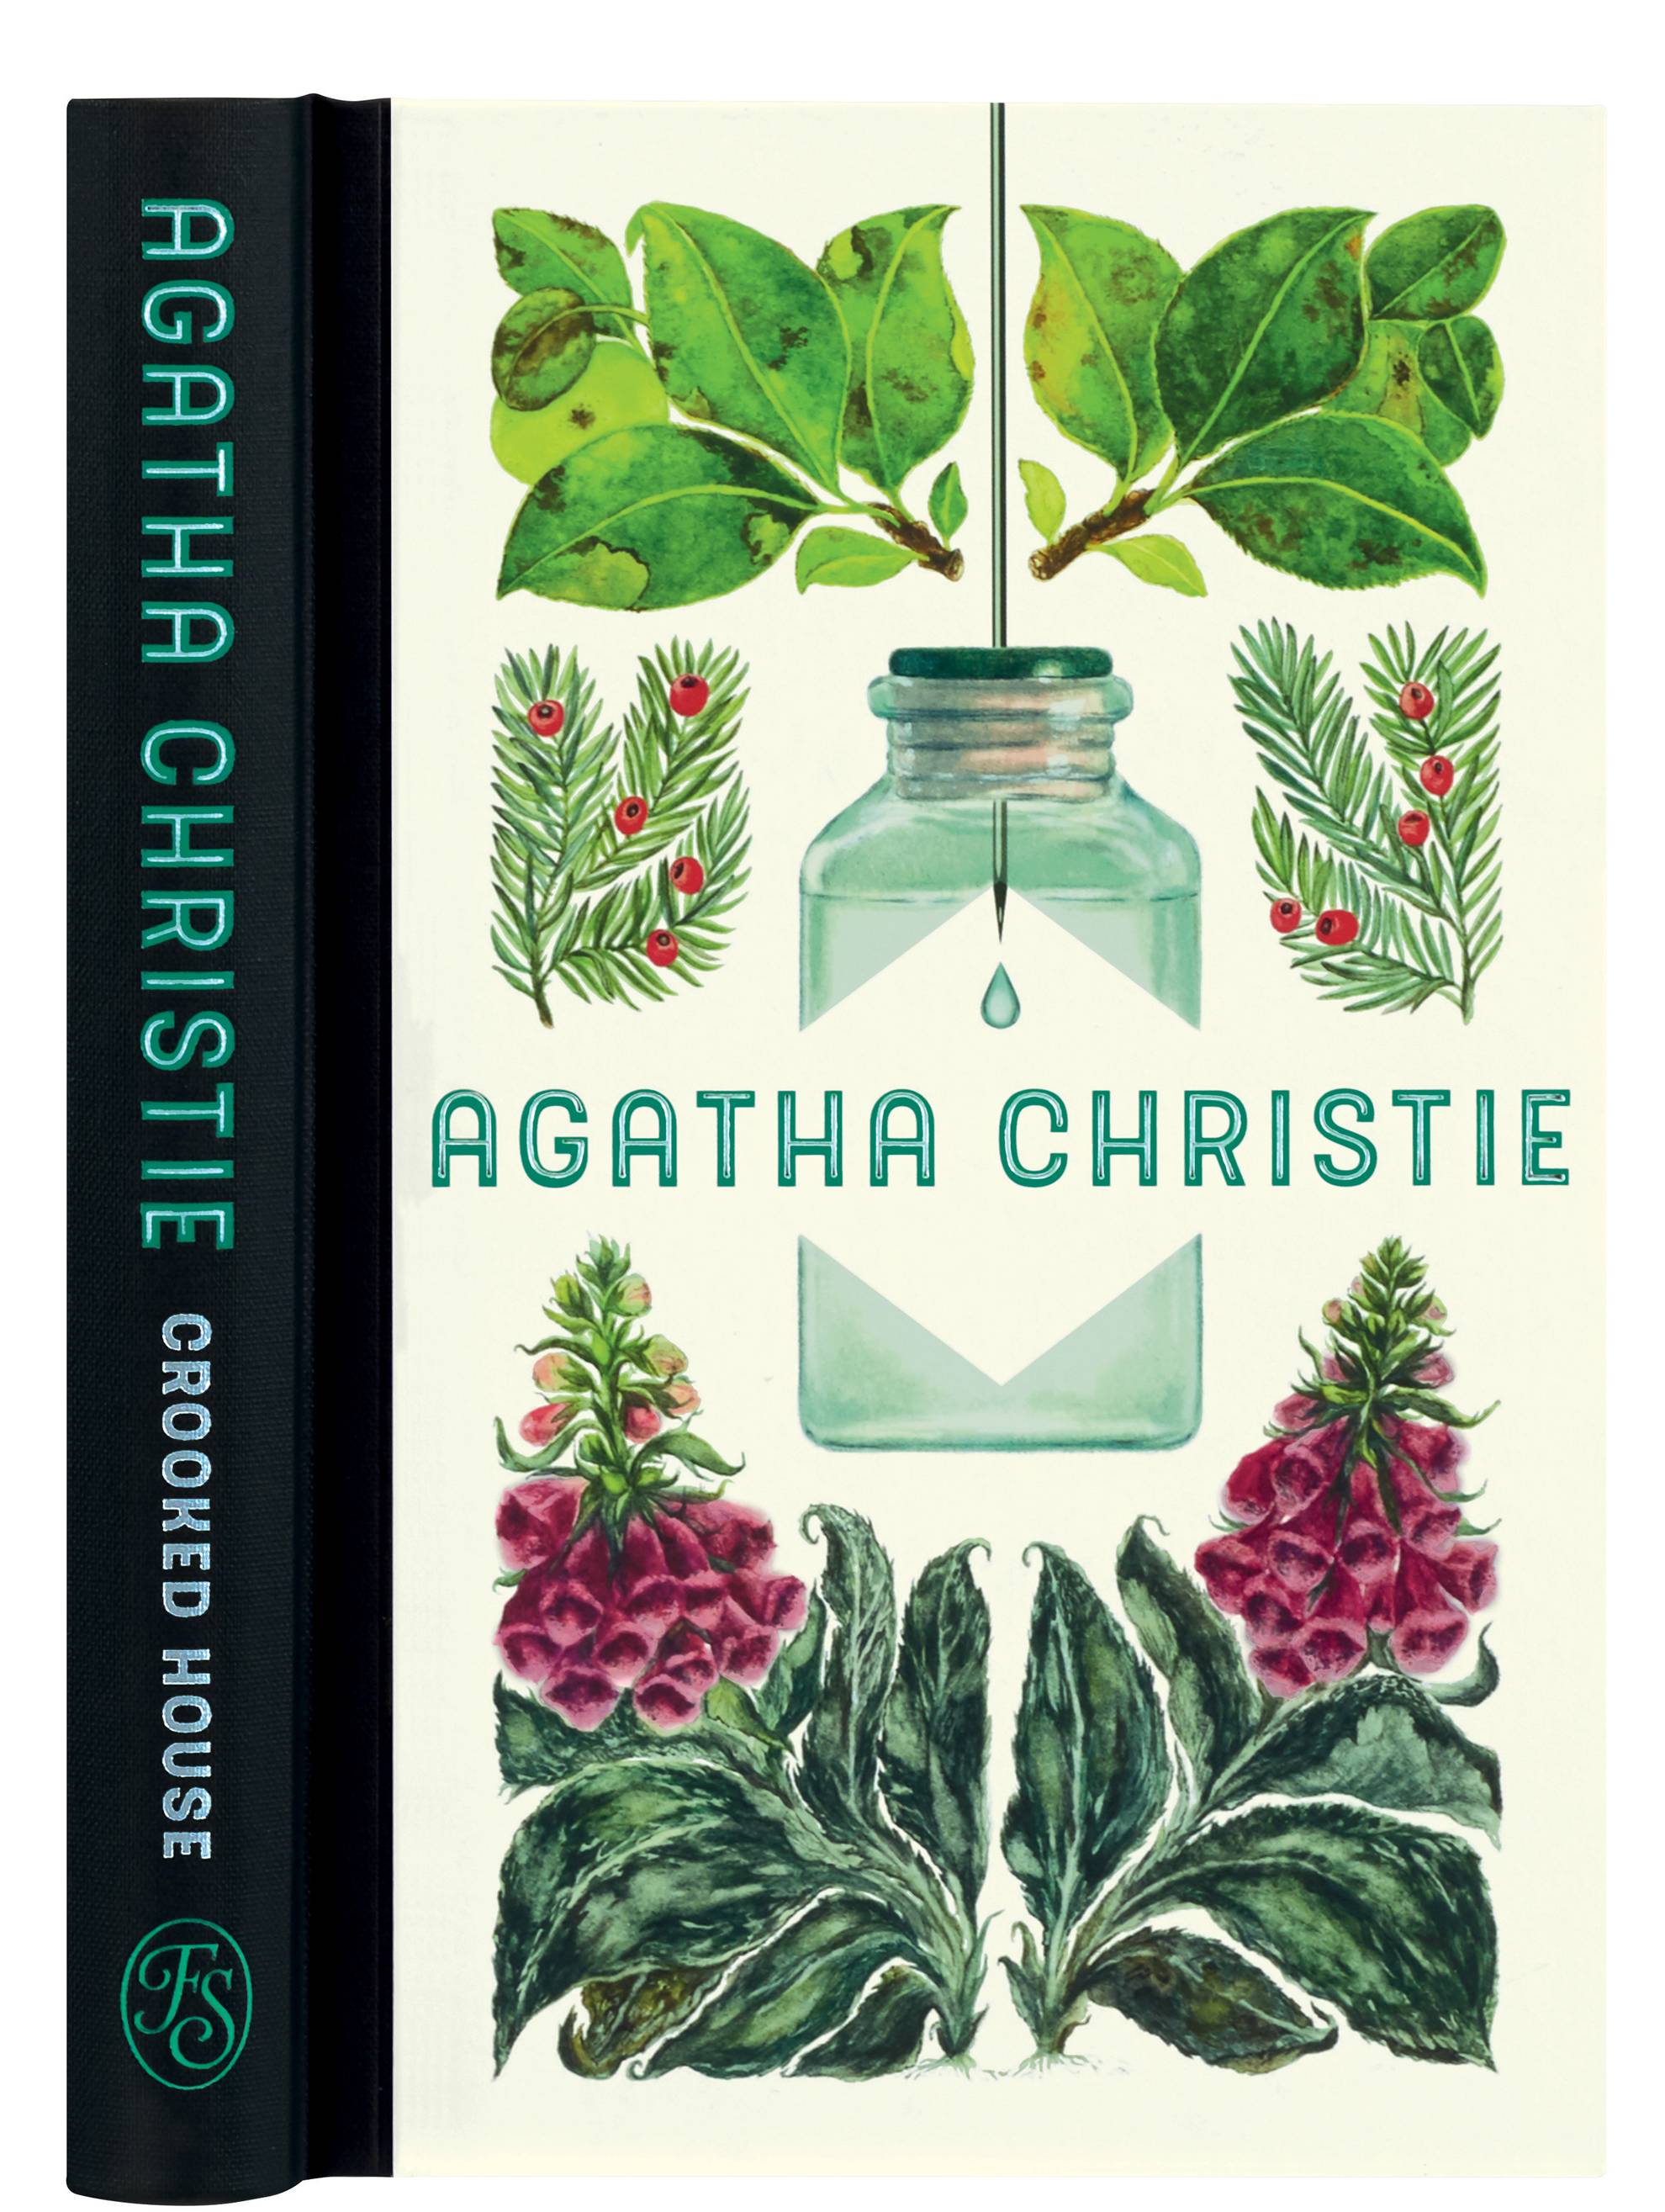 Botanical illustrations on the cover of Crooked House